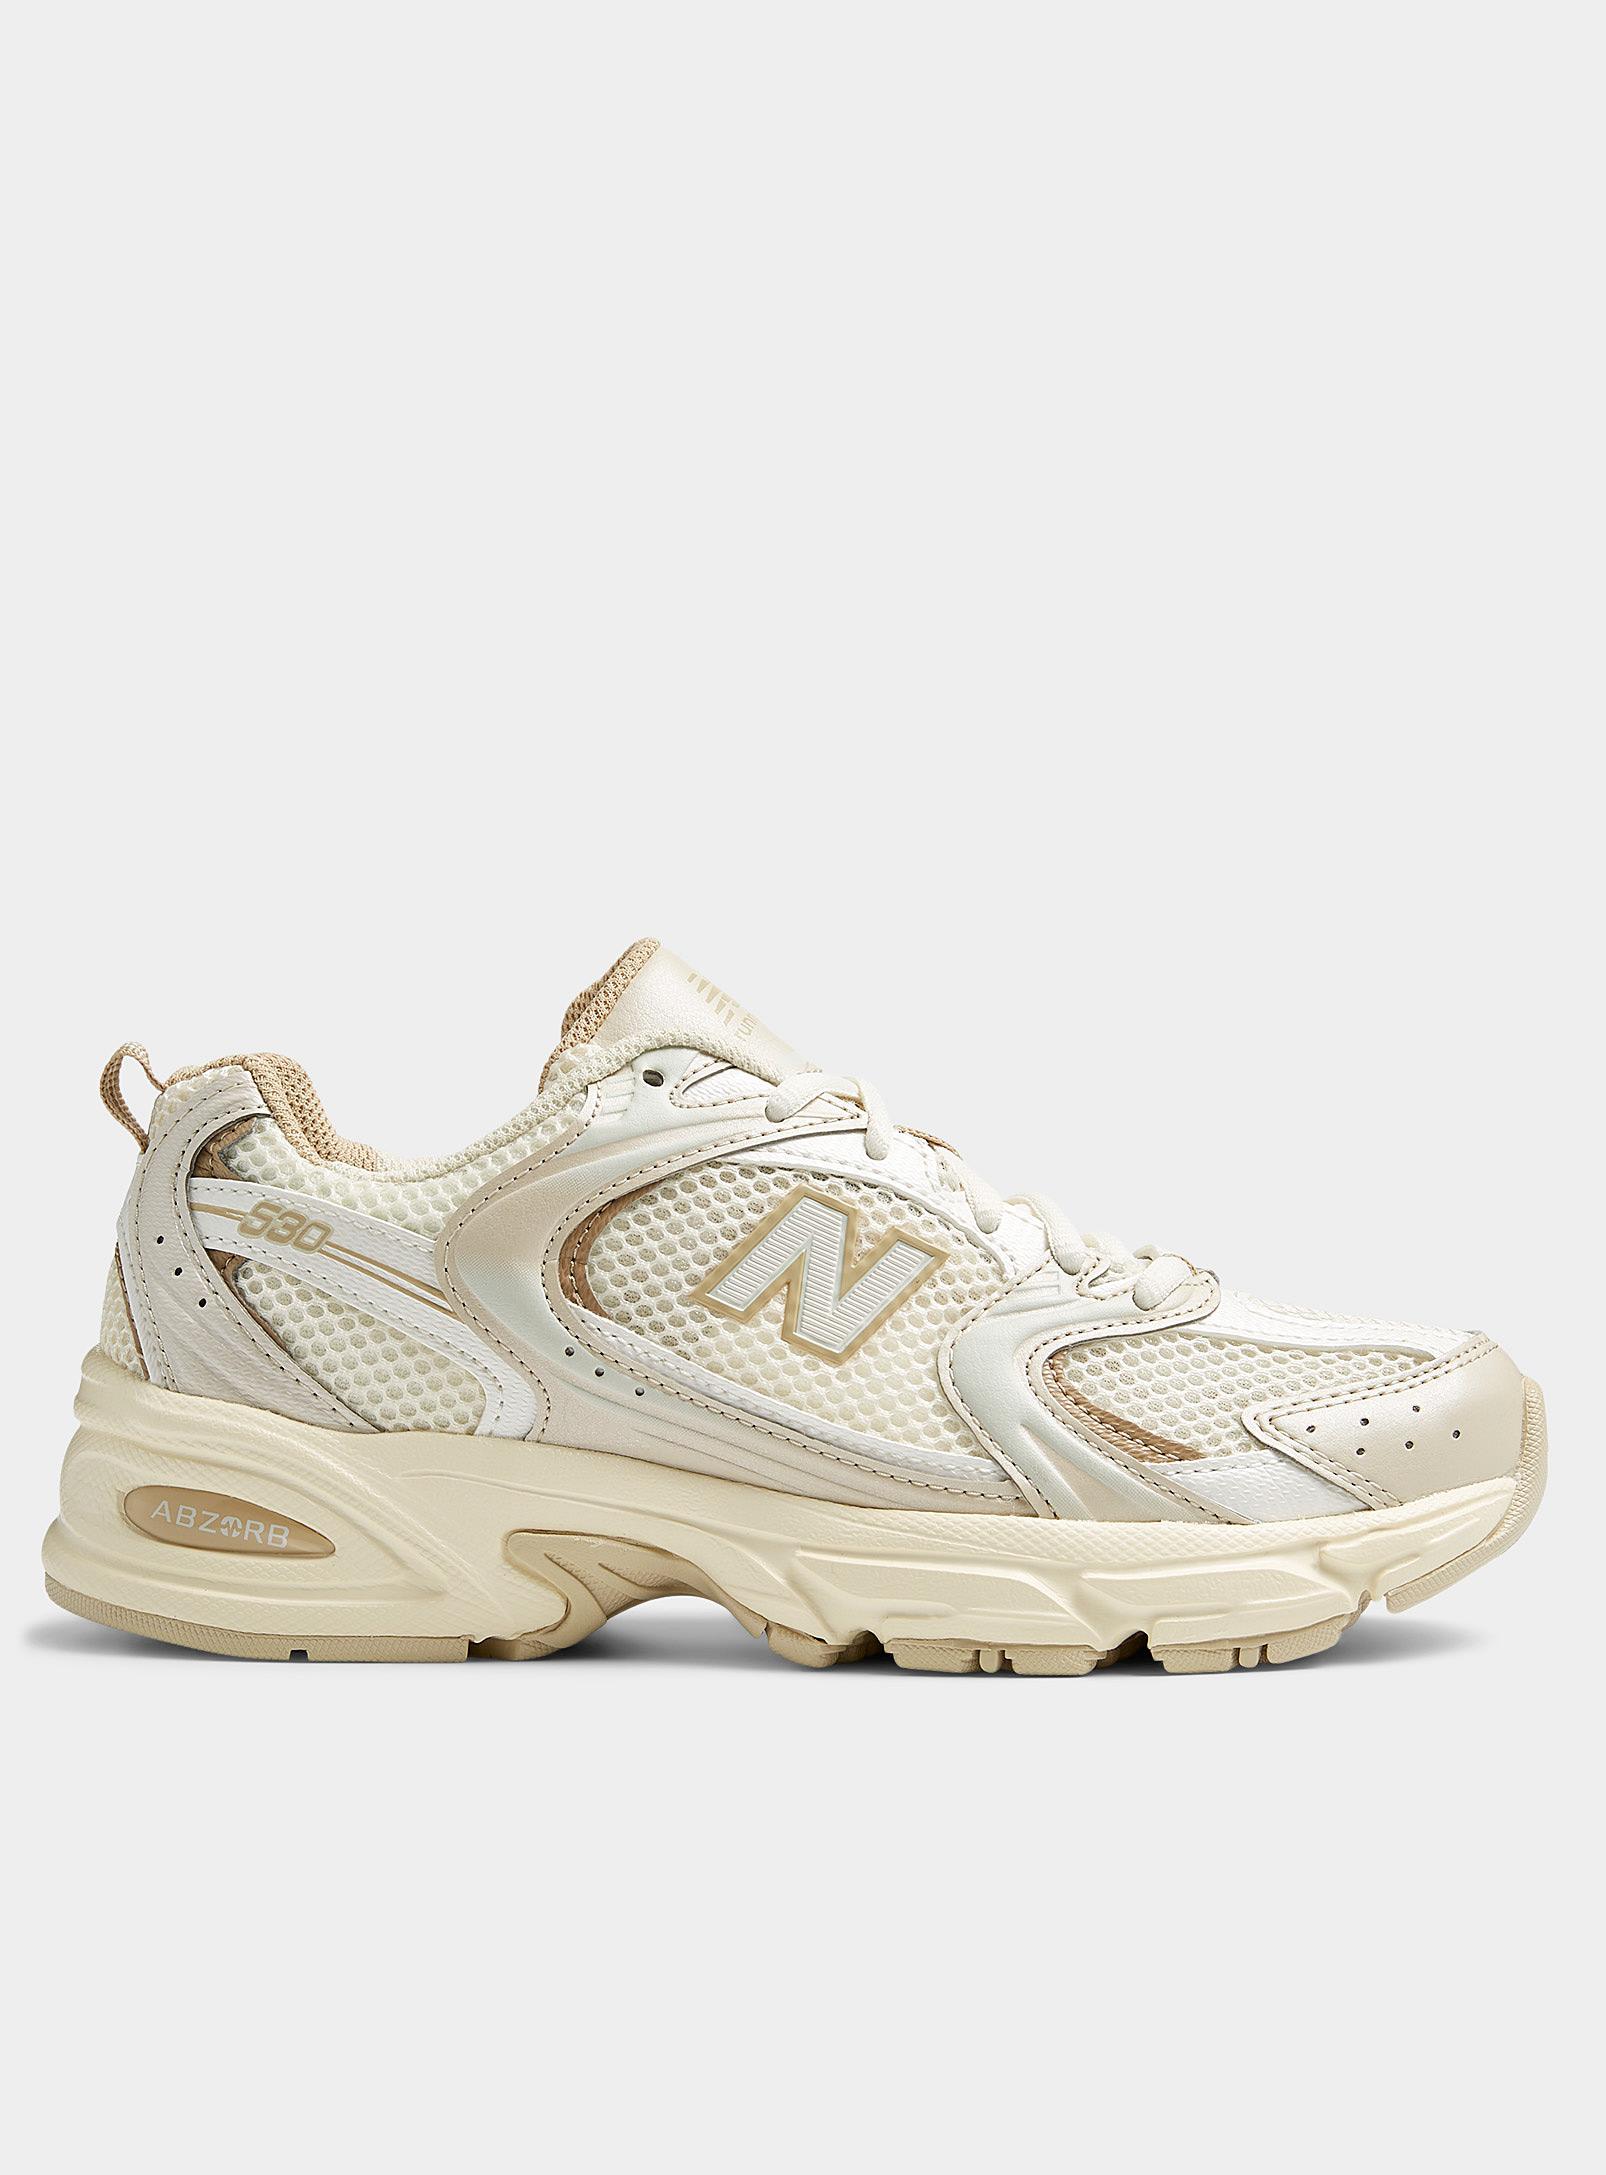 New Balance 530 Sneakers Women in Natural | Lyst